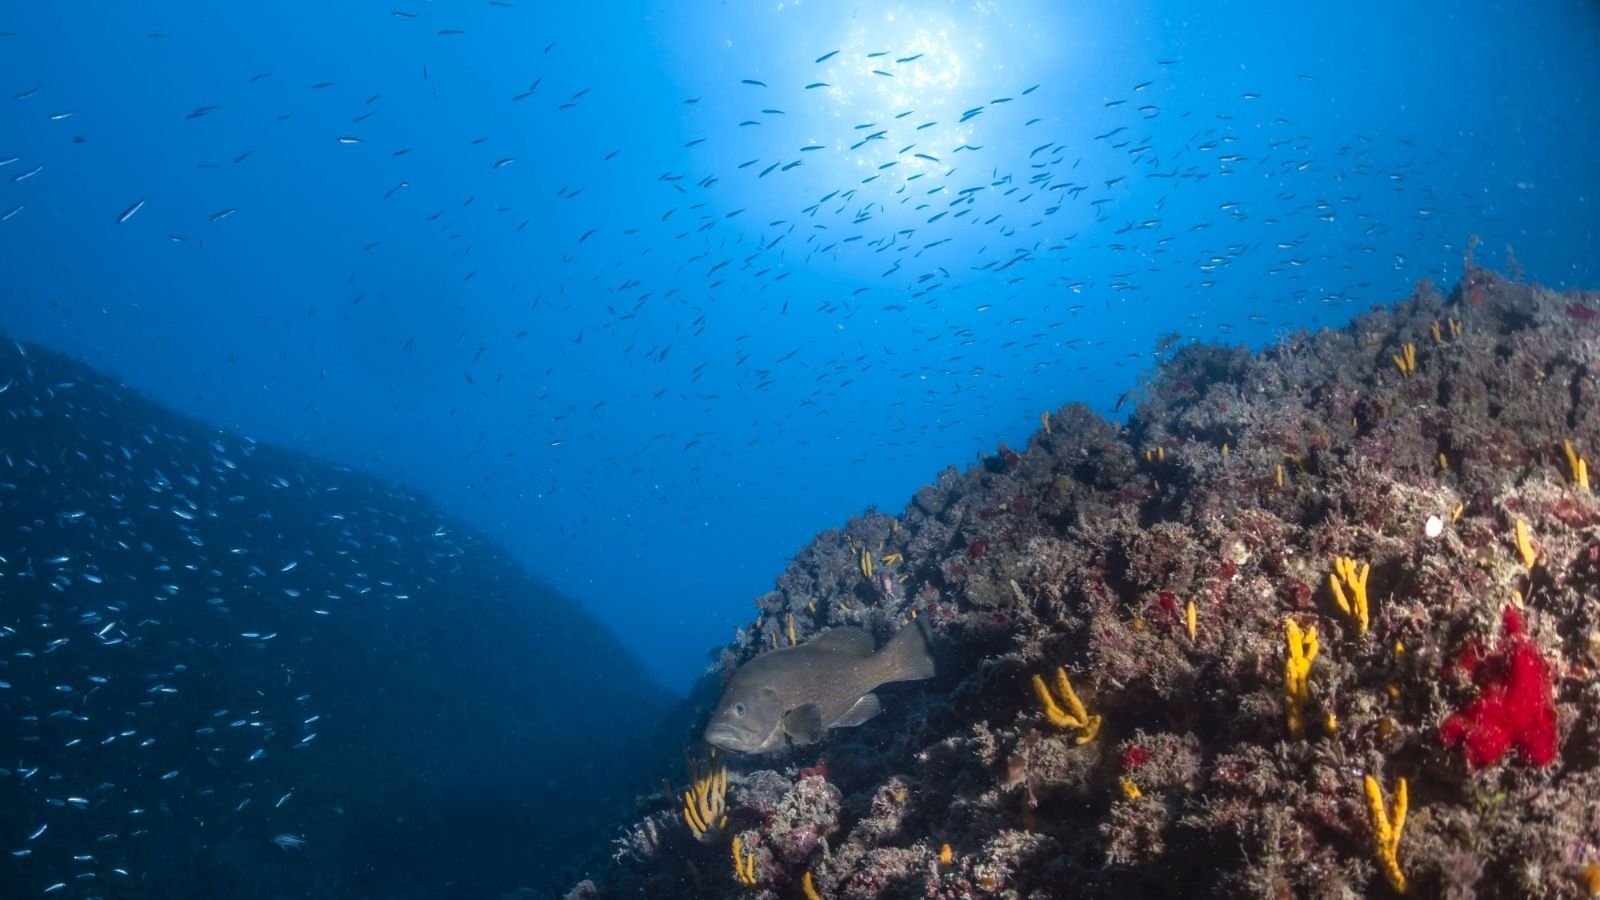 Entire marine protected areas are affected by overfishing and other human pressure taking place on their borders, new research shows. Photo by Dr. Shevy Rothman/Tel Aviv University